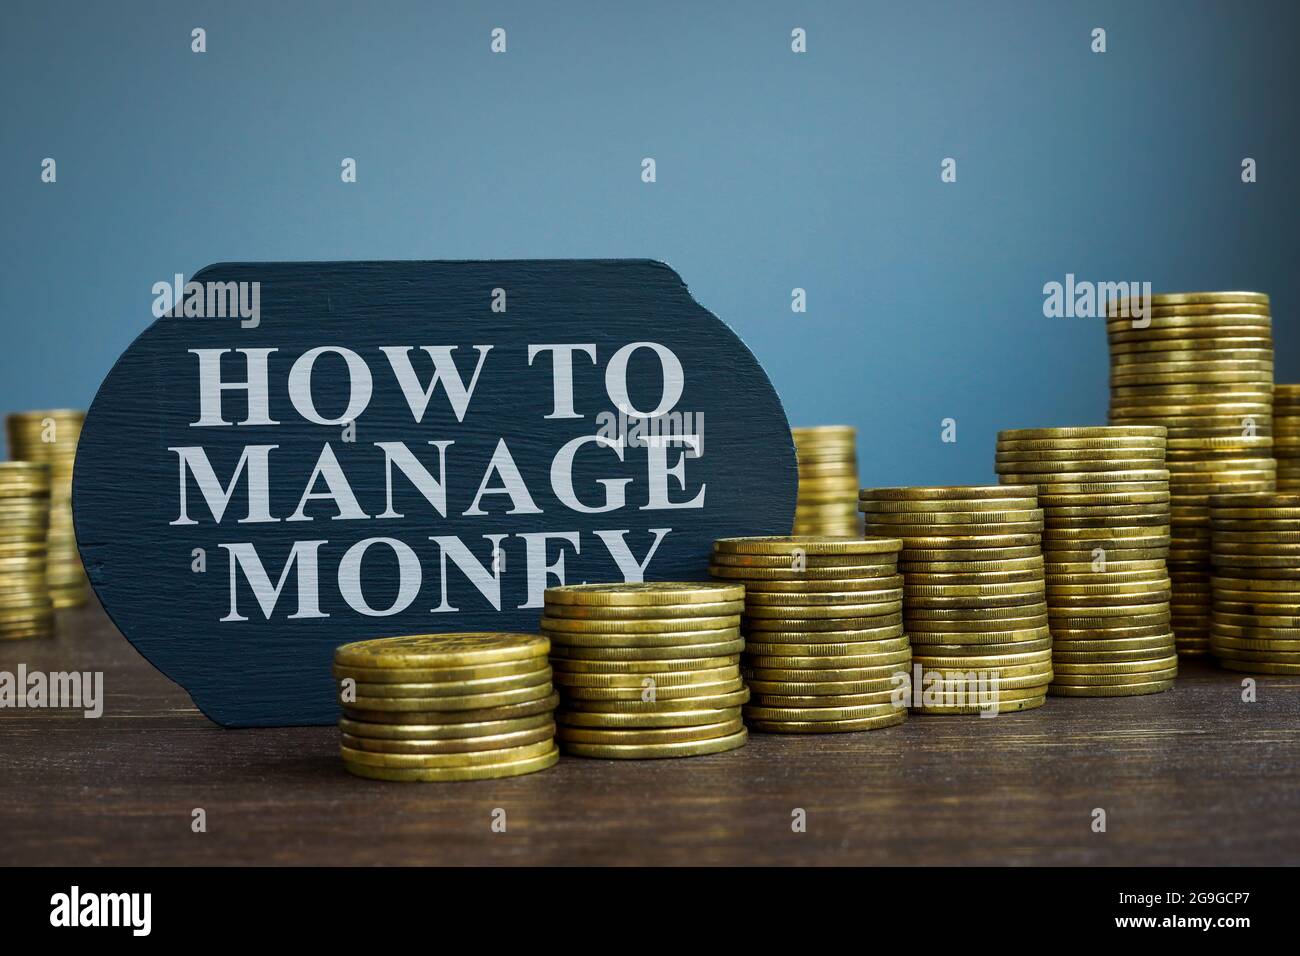 How to manage money on the plate and coins. Stock Photo